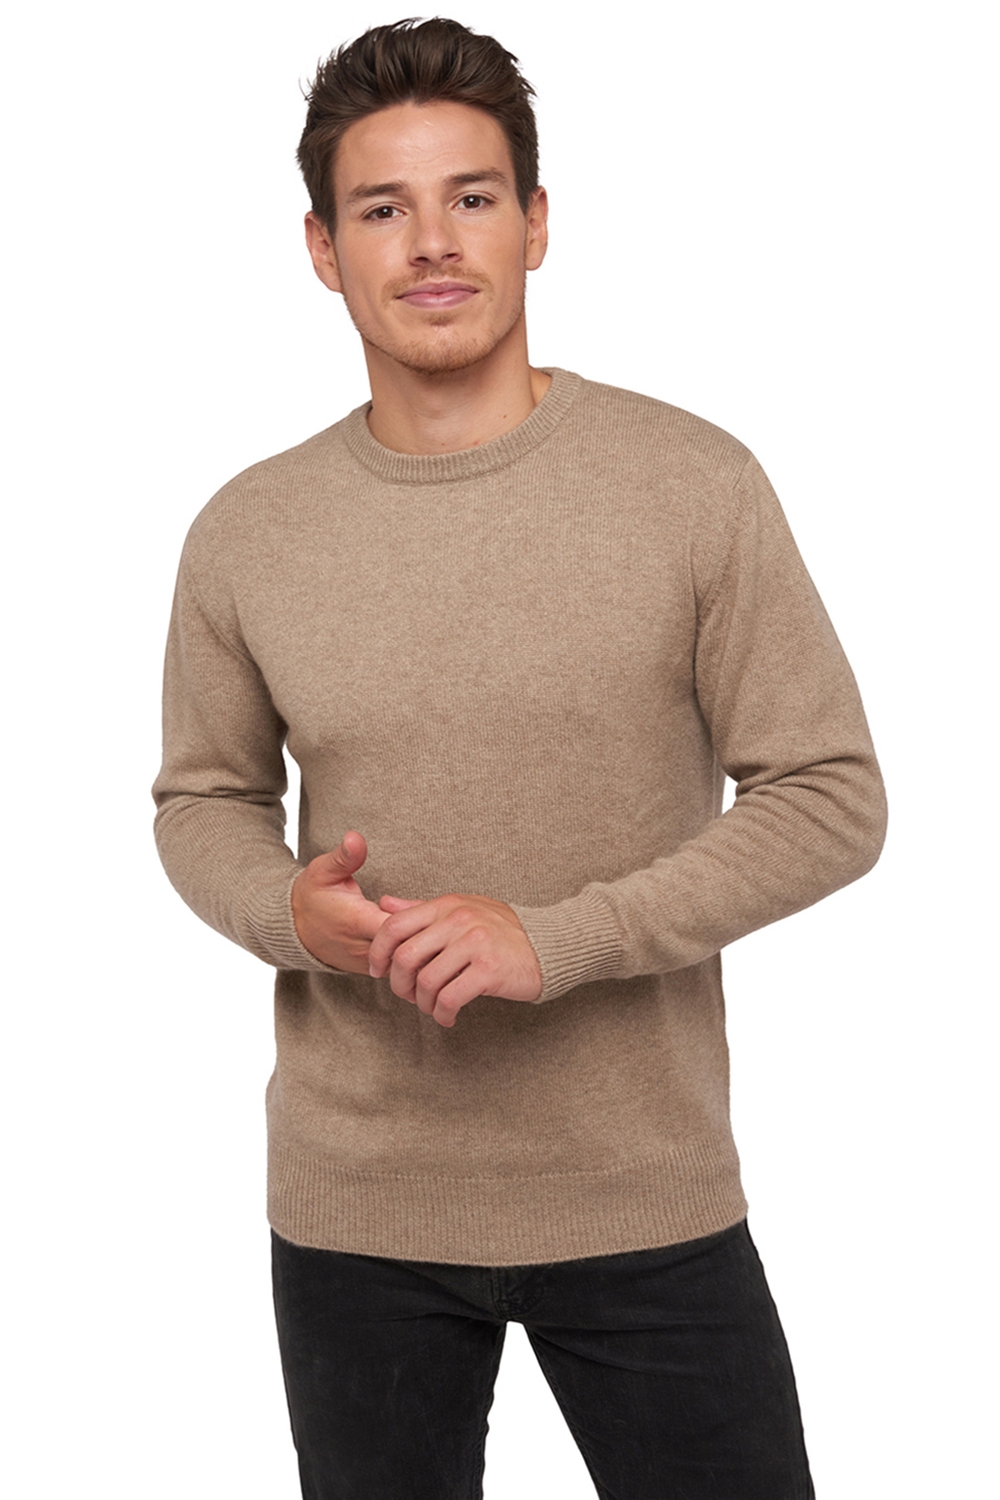 Cachemire Naturel pull homme natural ness 4f natural stone 2xl